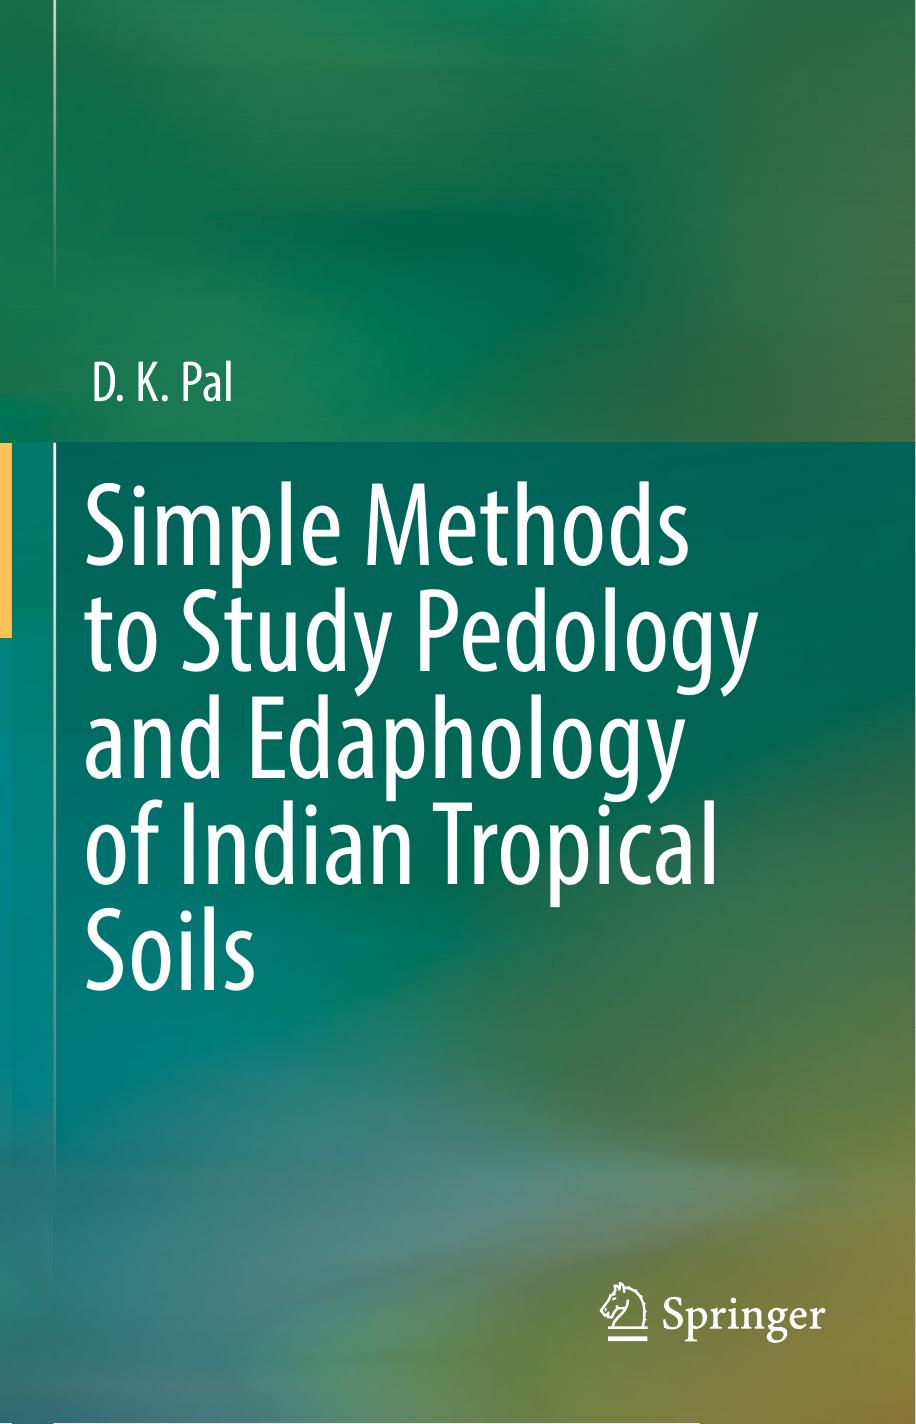 Simple Methods to Study Pedology and Edaphology of Indian Tropical Soils by D. K. Pal (z-lib.org), 2019